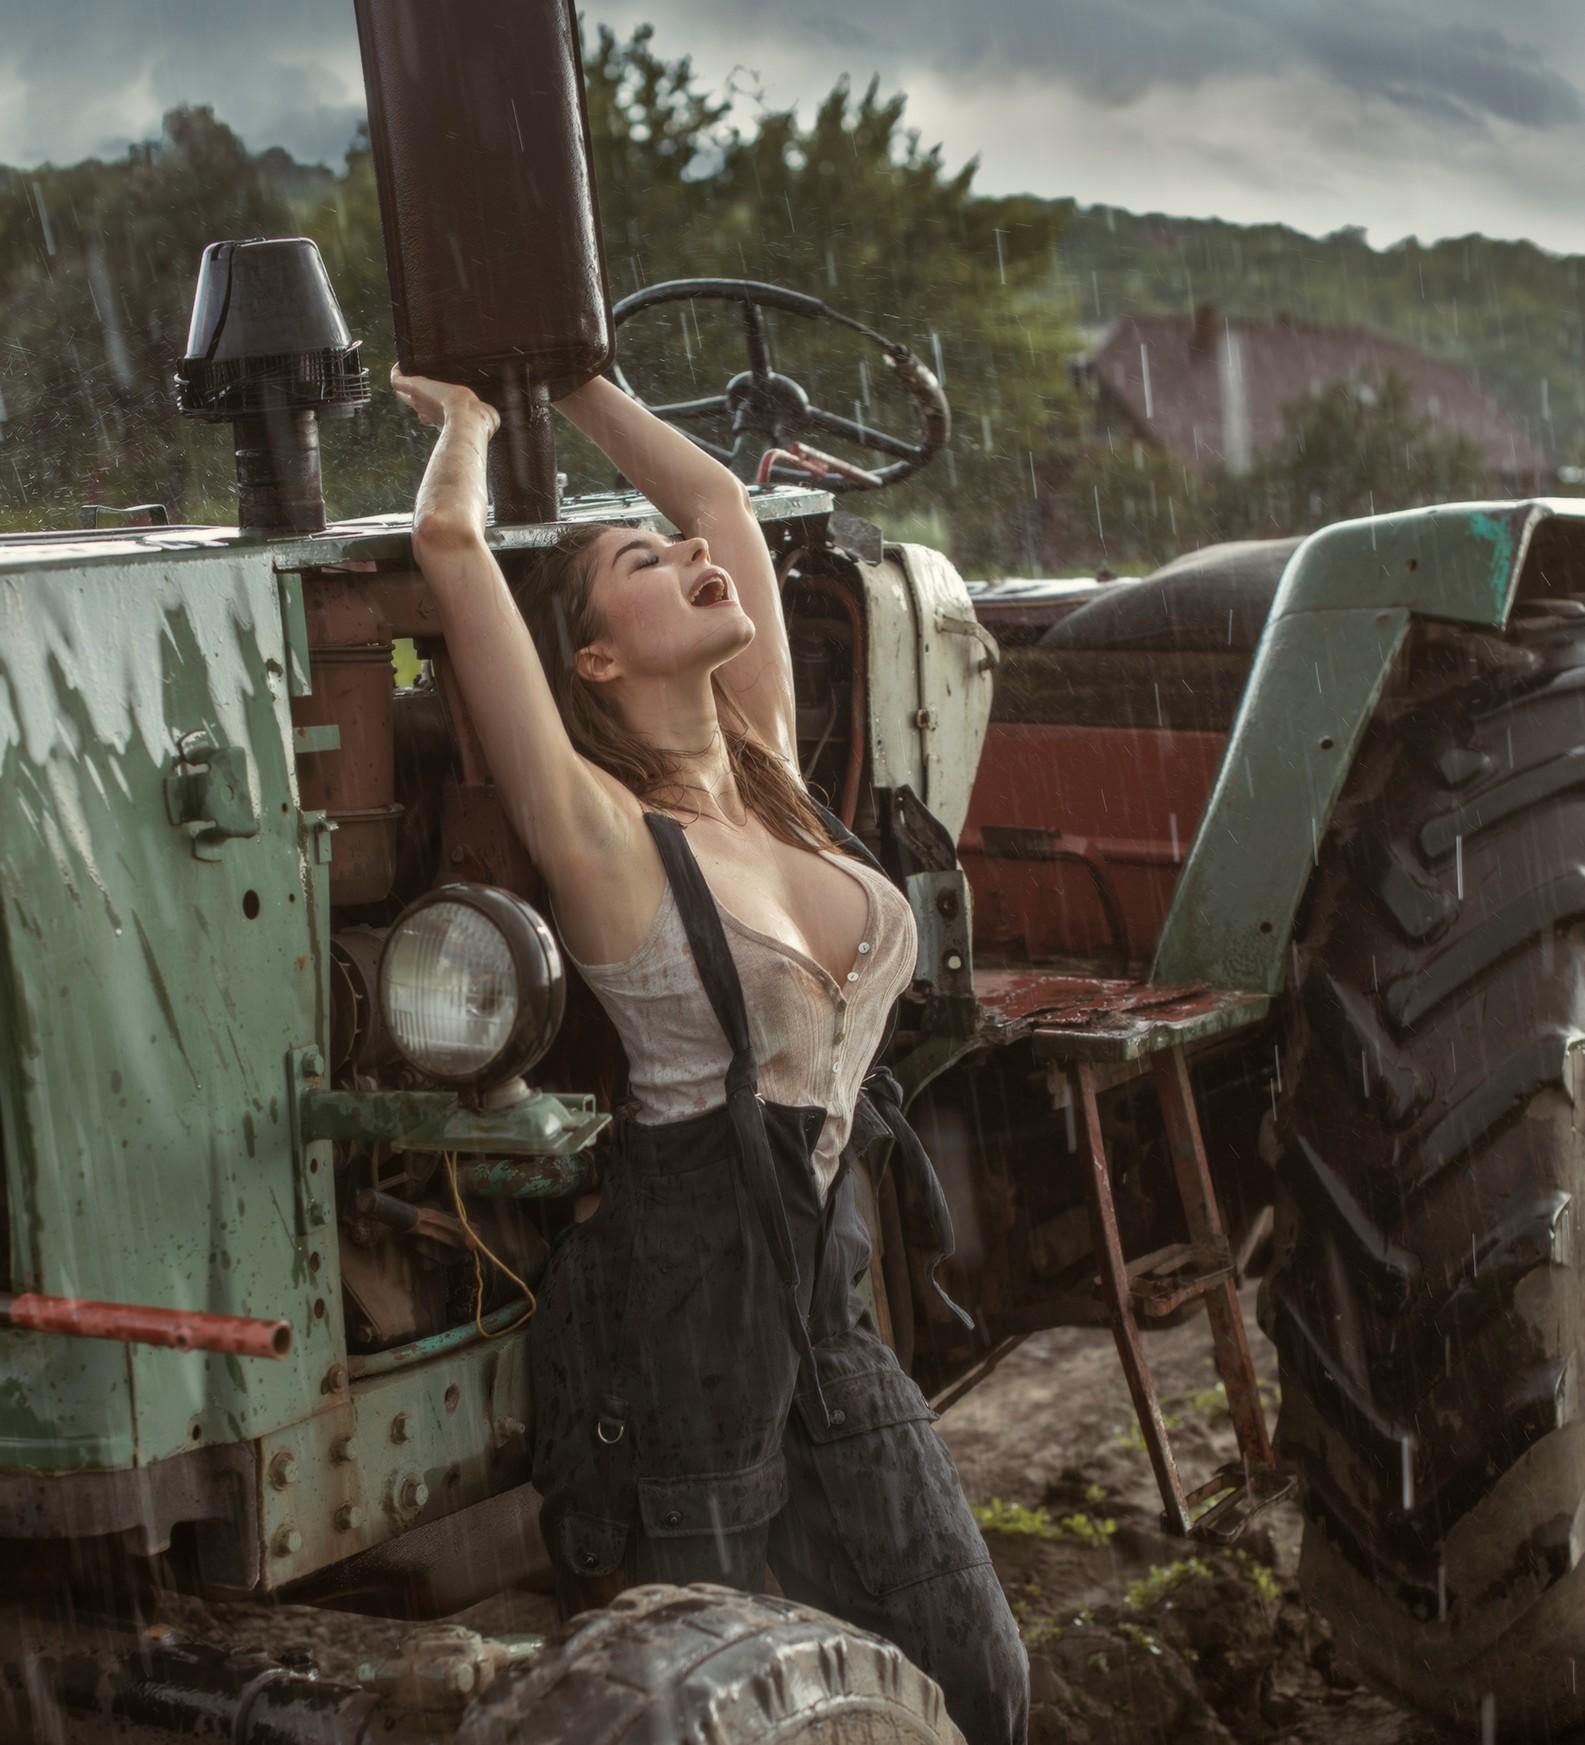 People 1585x1745 David Dubnitskiy model women ksenia lugovskaya rain brunette open mouth arms up armpits open clothes boobs cleavage suspenders wet body water drops tractors farm women outdoors Women with Tractors